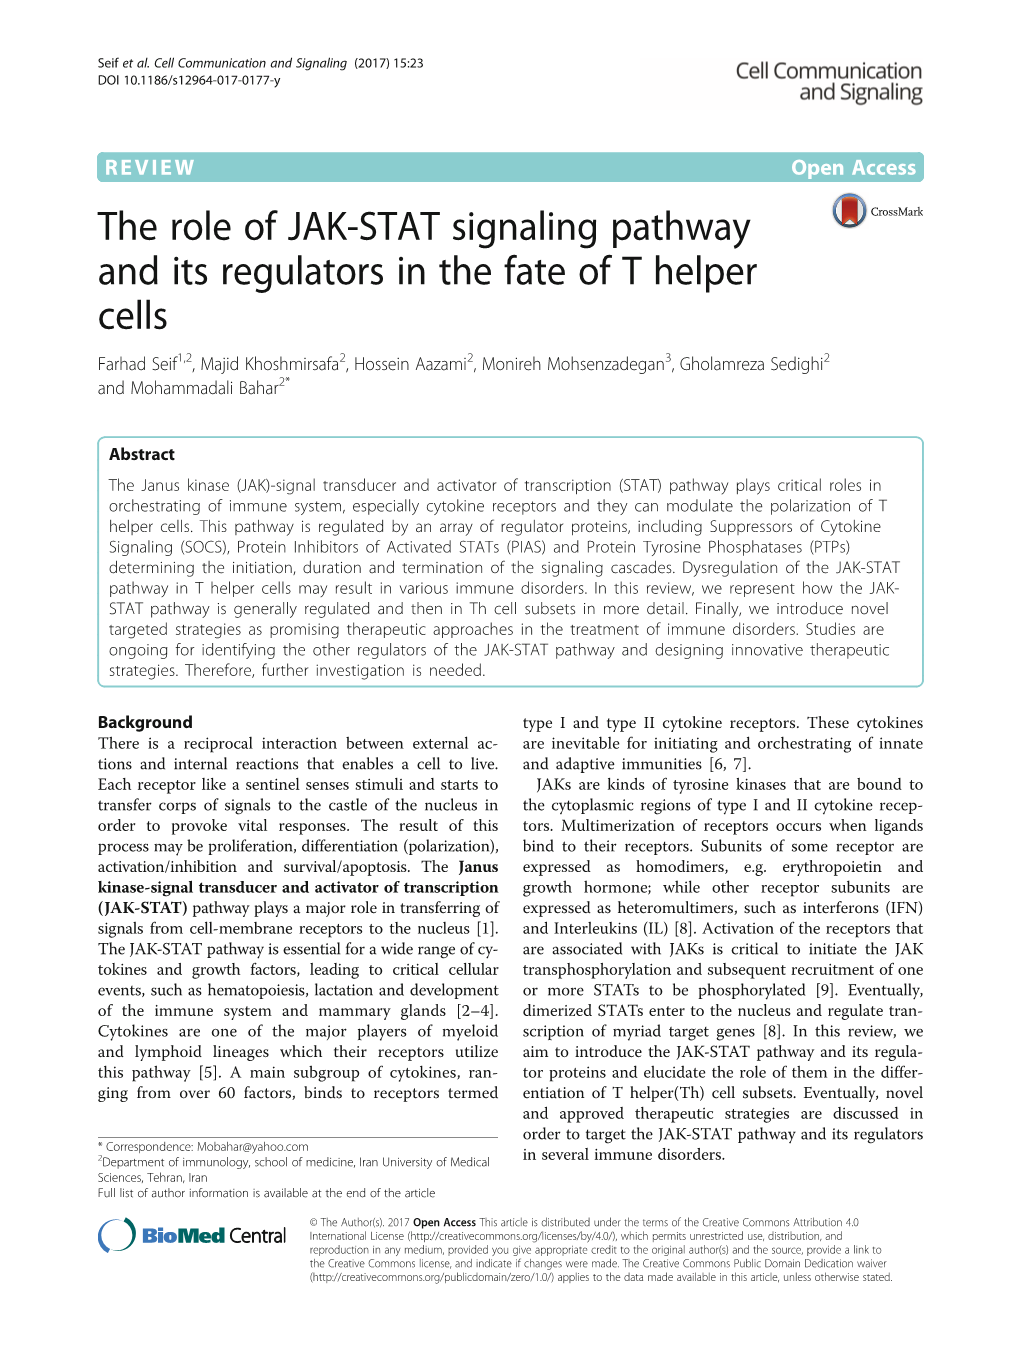 The Role of JAK-STAT Signaling Pathway and Its Regulators in The